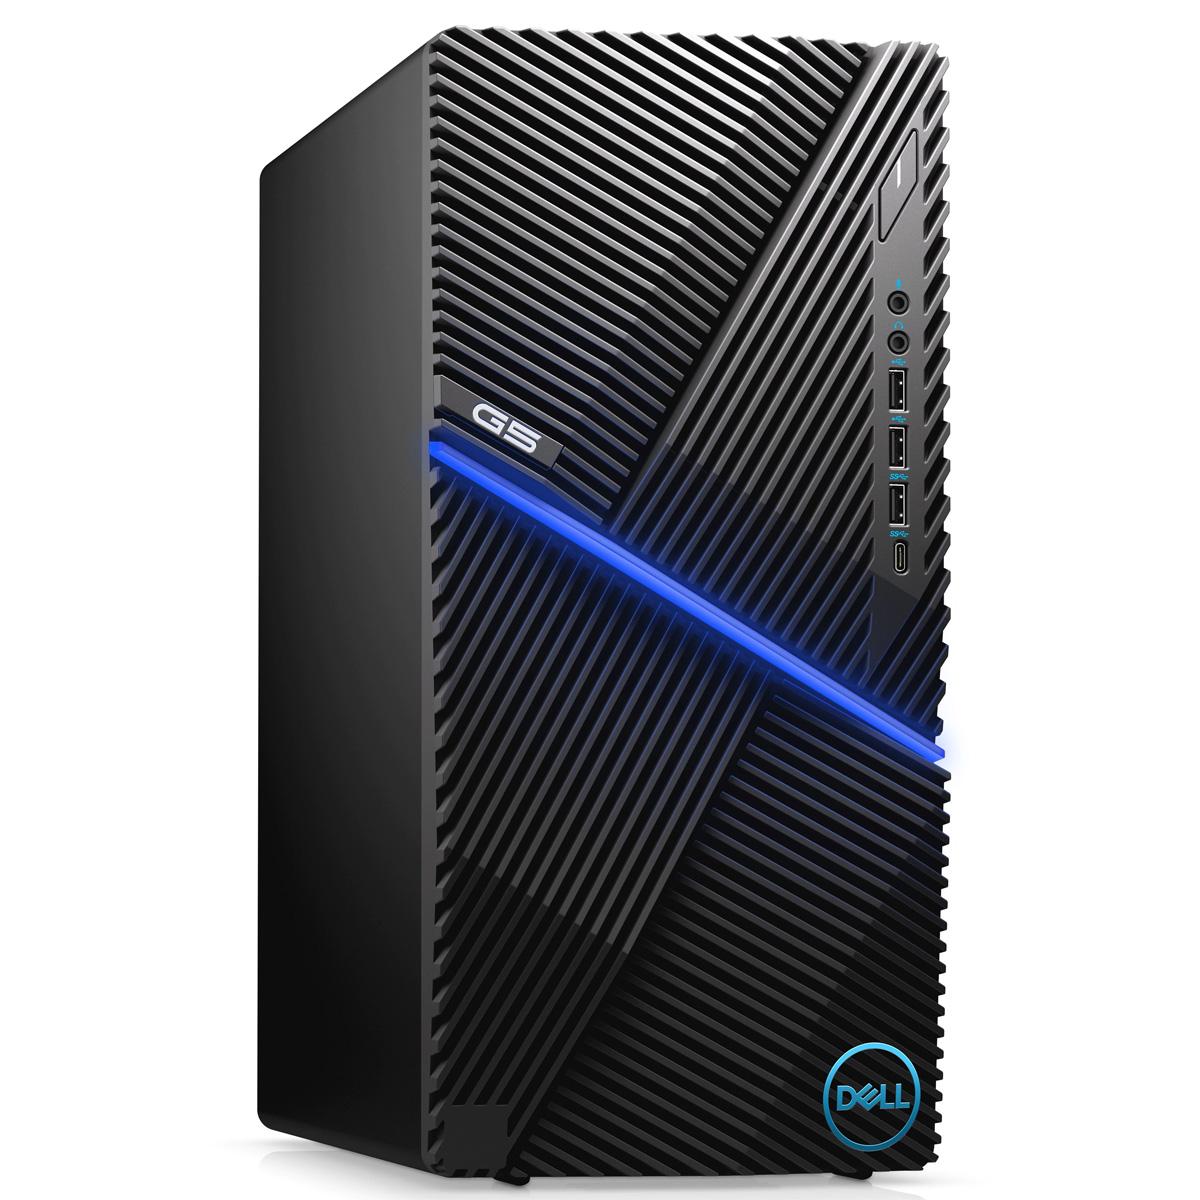 Dell G5 i5 8GB 512GB GeForce GTX 1650 Gaming Desktop Computer for $595 Shipped